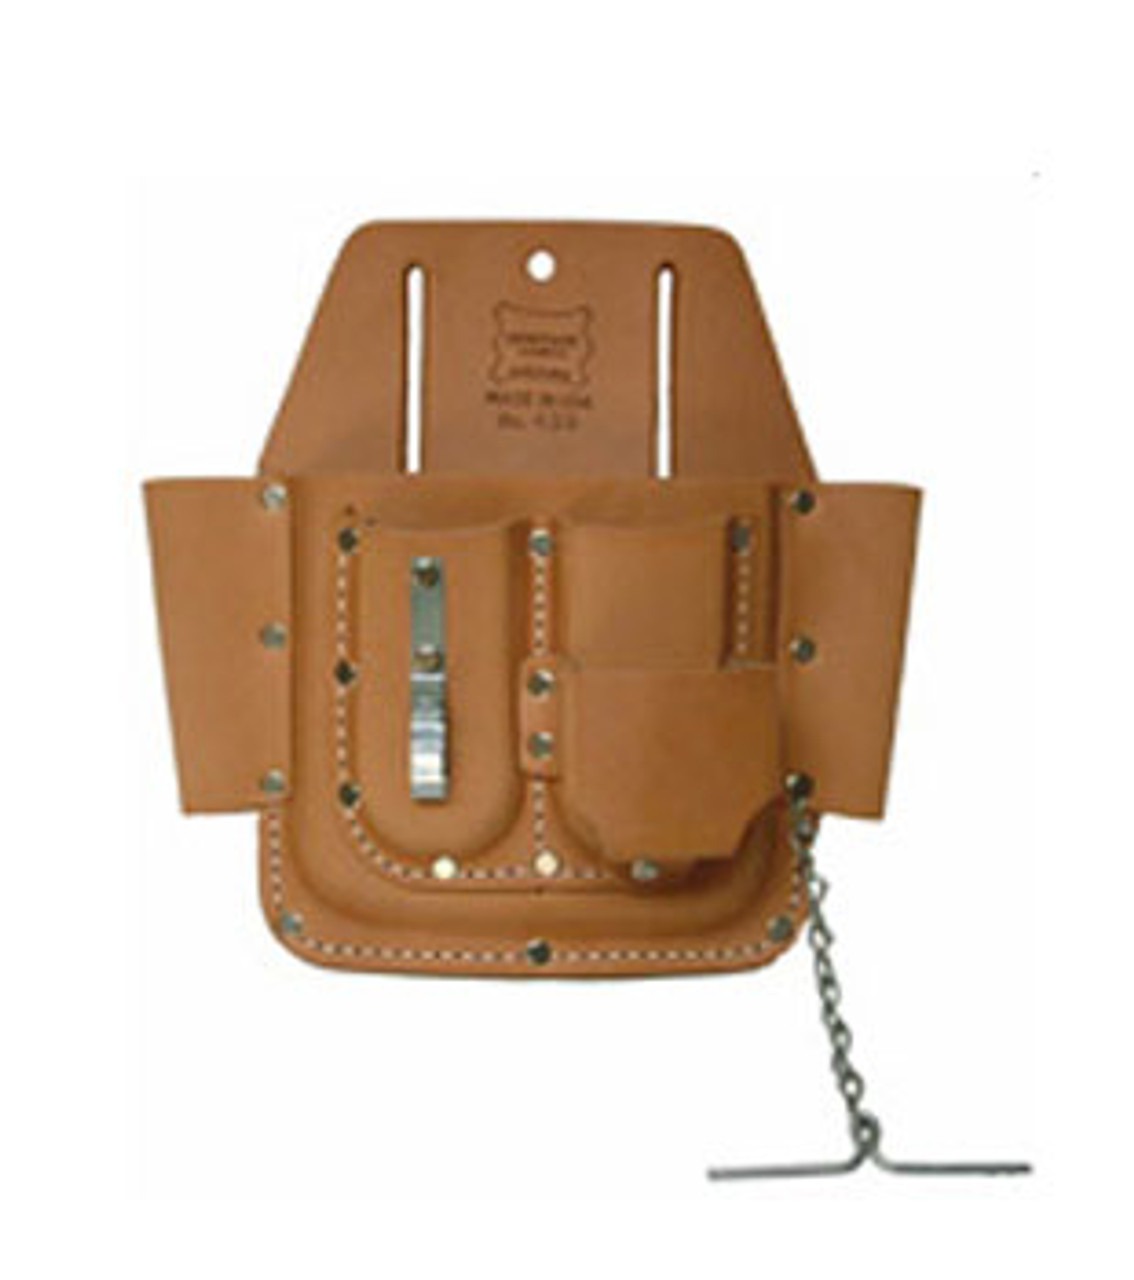 6 - Pocket Professional Leather Tool Pouch